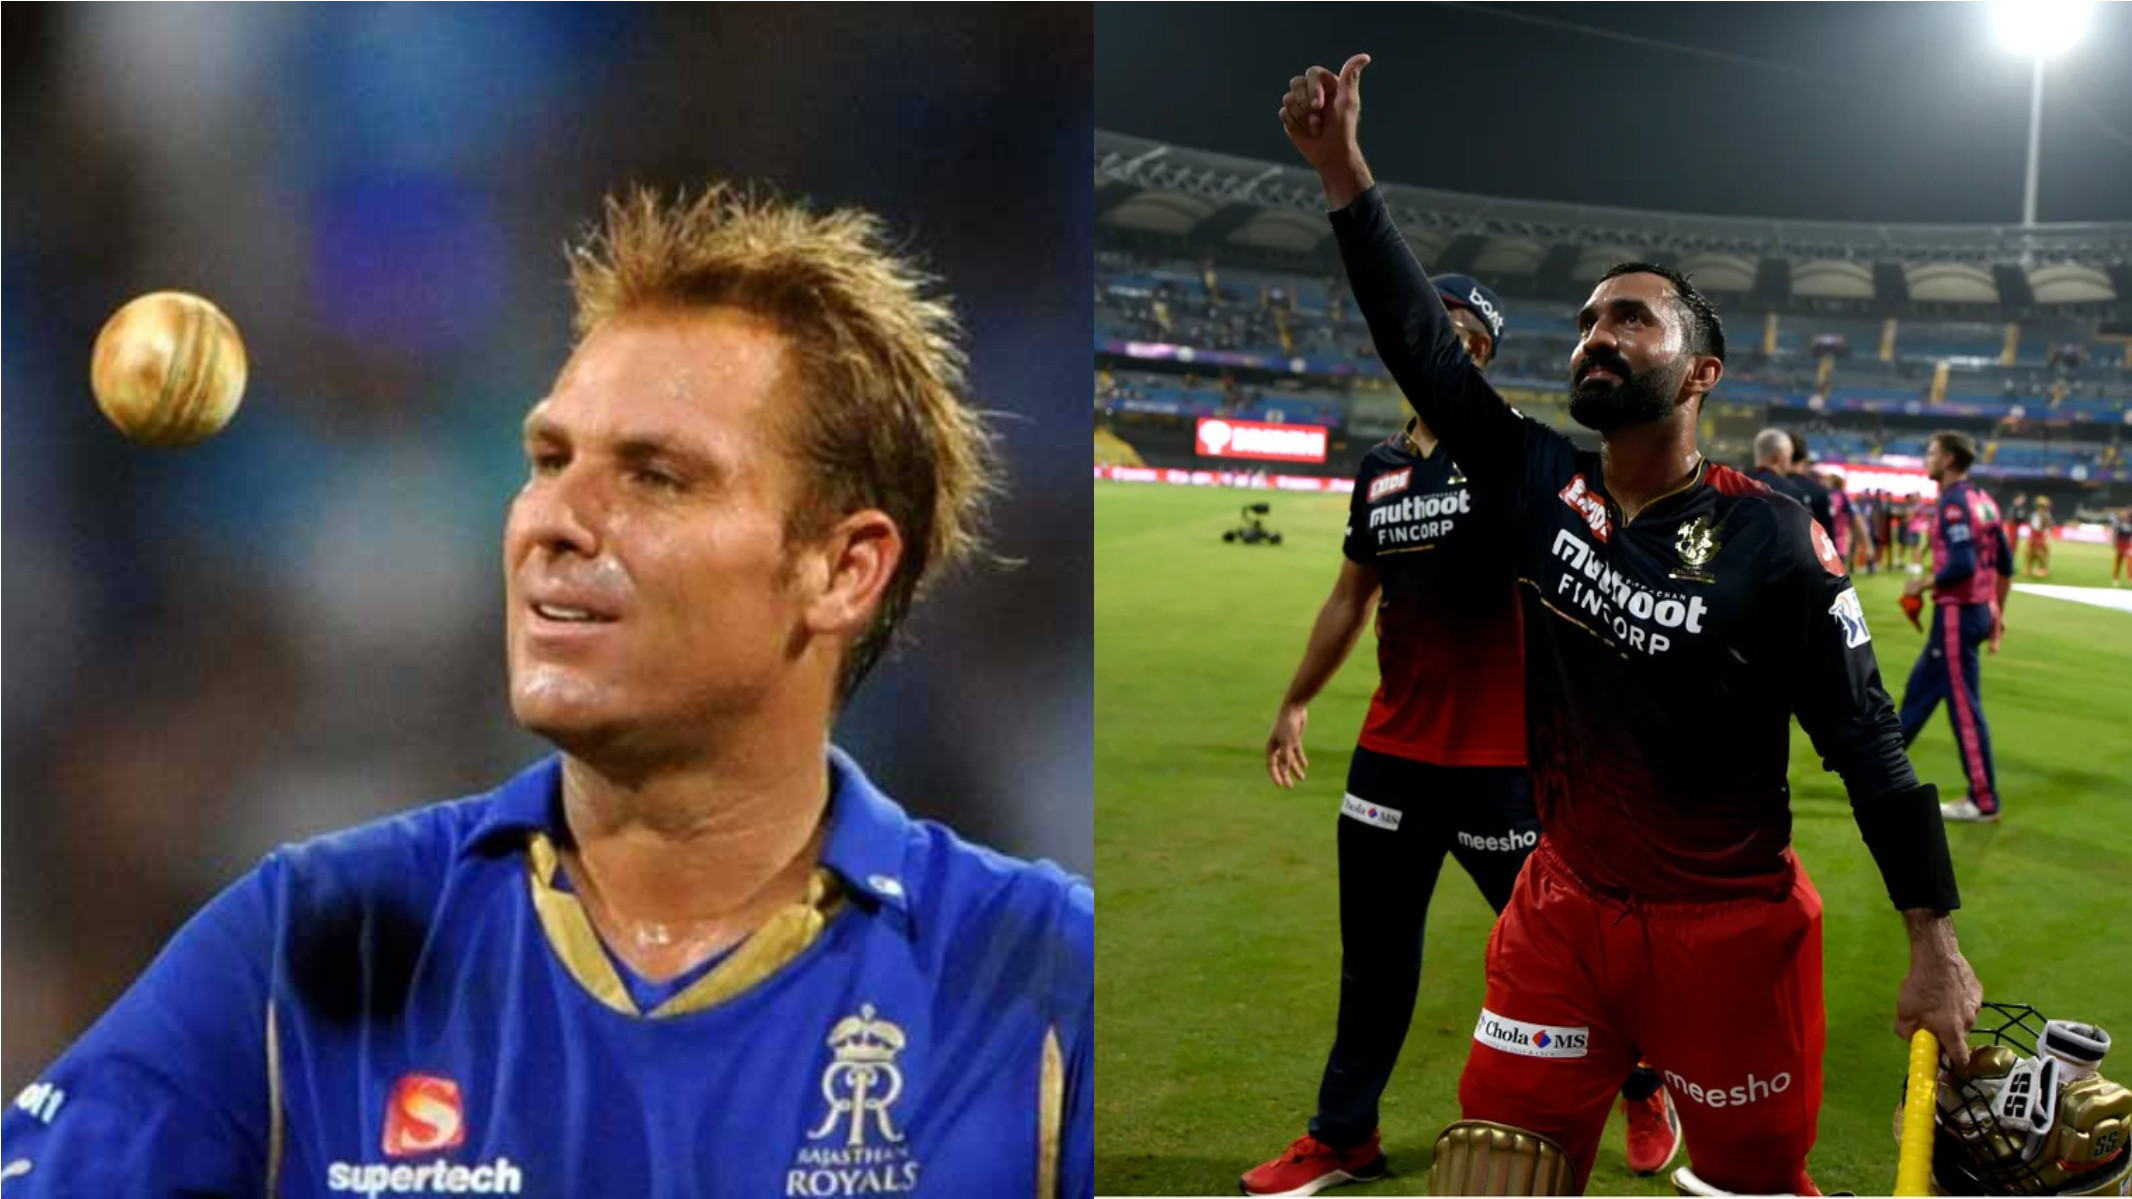 IPL 2022: “Hey youngster, let me see what you've got”, Karthik recalls facing Warne in IPL 2009